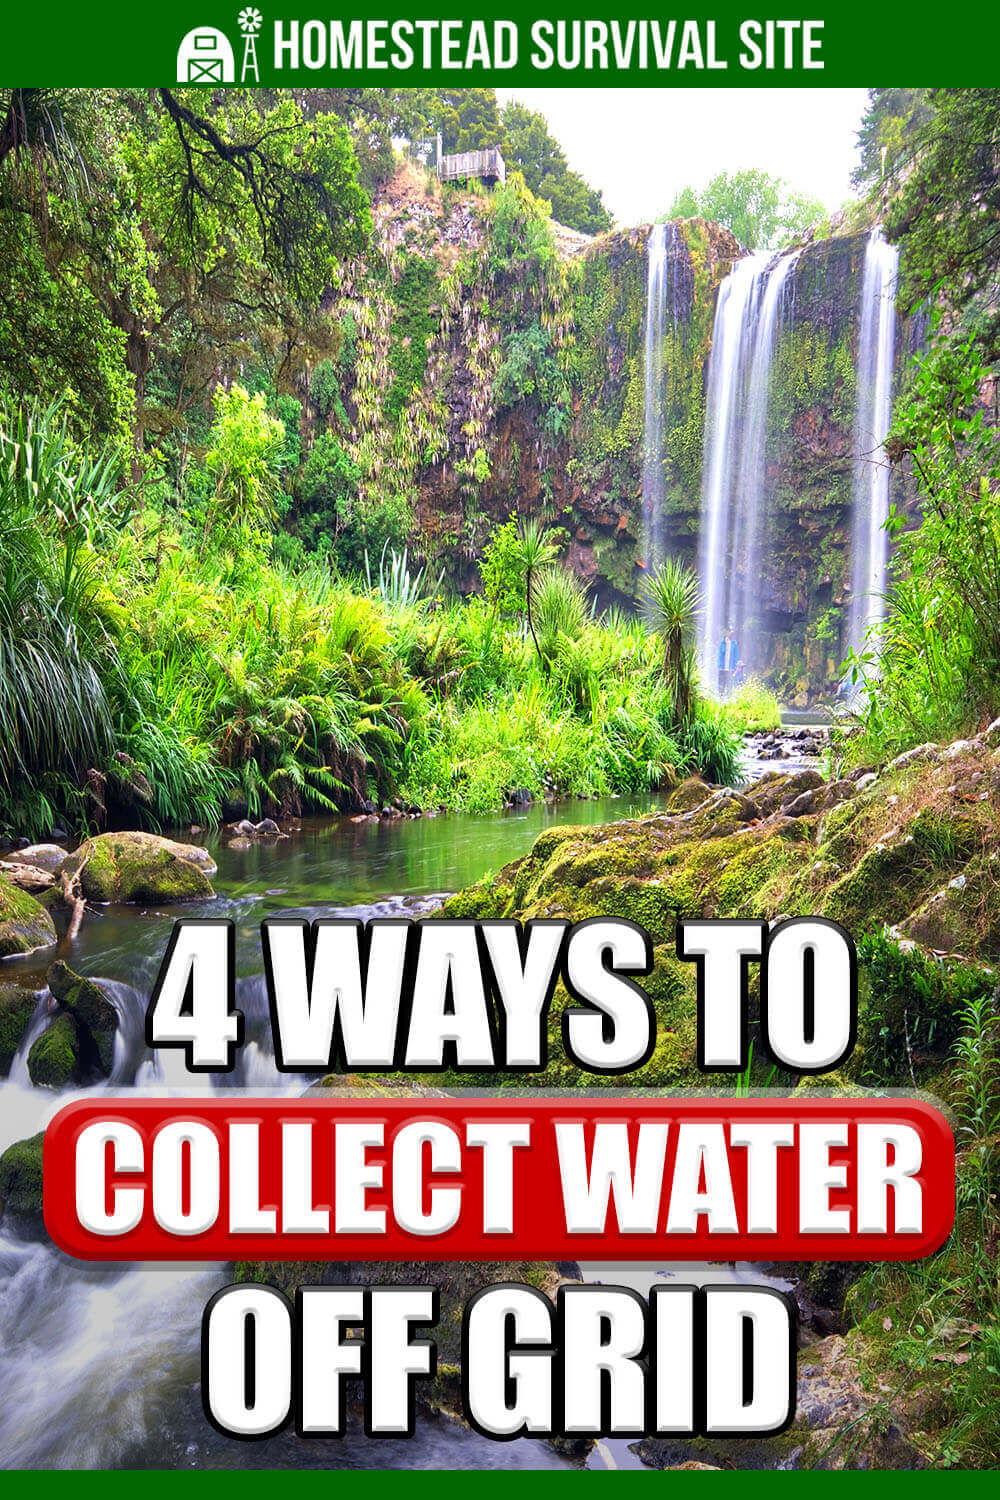 4 Ways to Collect Water Off Grid